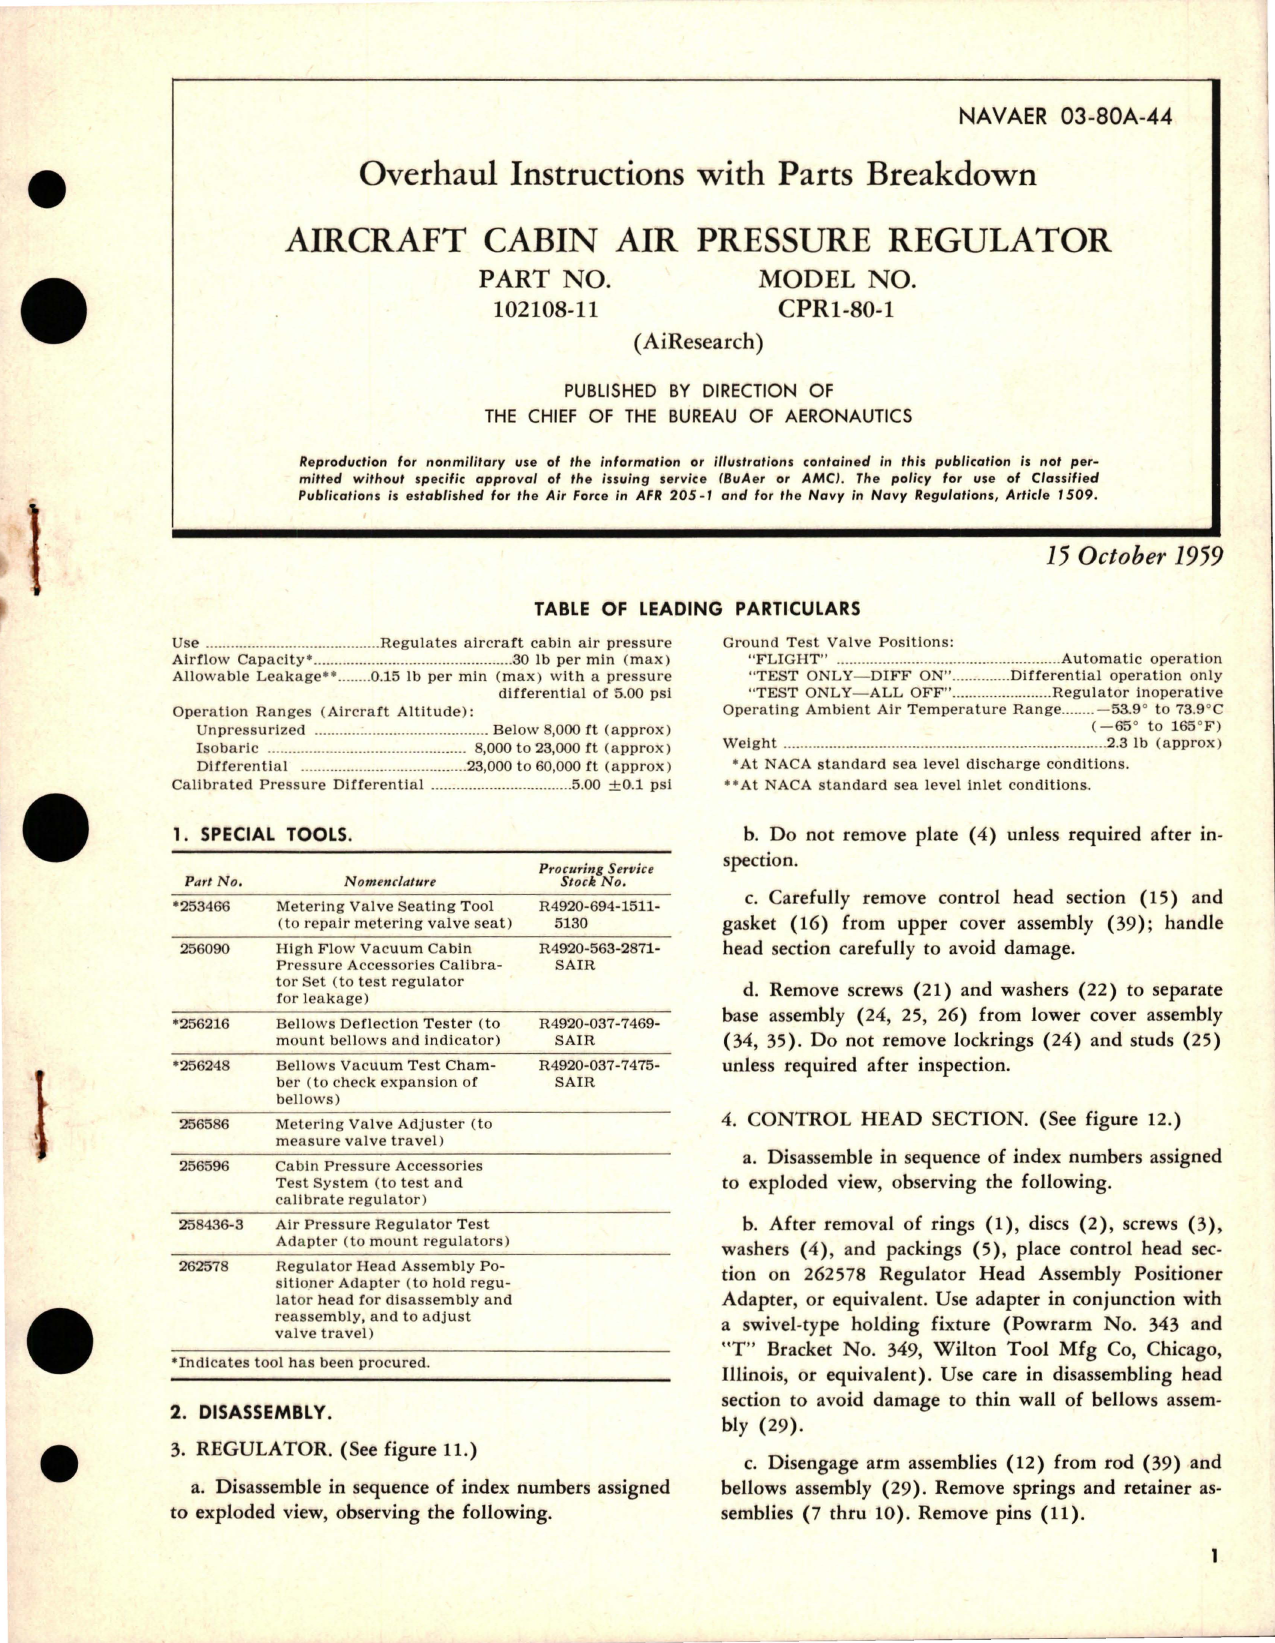 Sample page 1 from AirCorps Library document: Overhaul Instructions with Parts Breakdown for Aircraft Cabin Air Pressure Regulator - Part 102108-11 - Model CPR1-80-1 